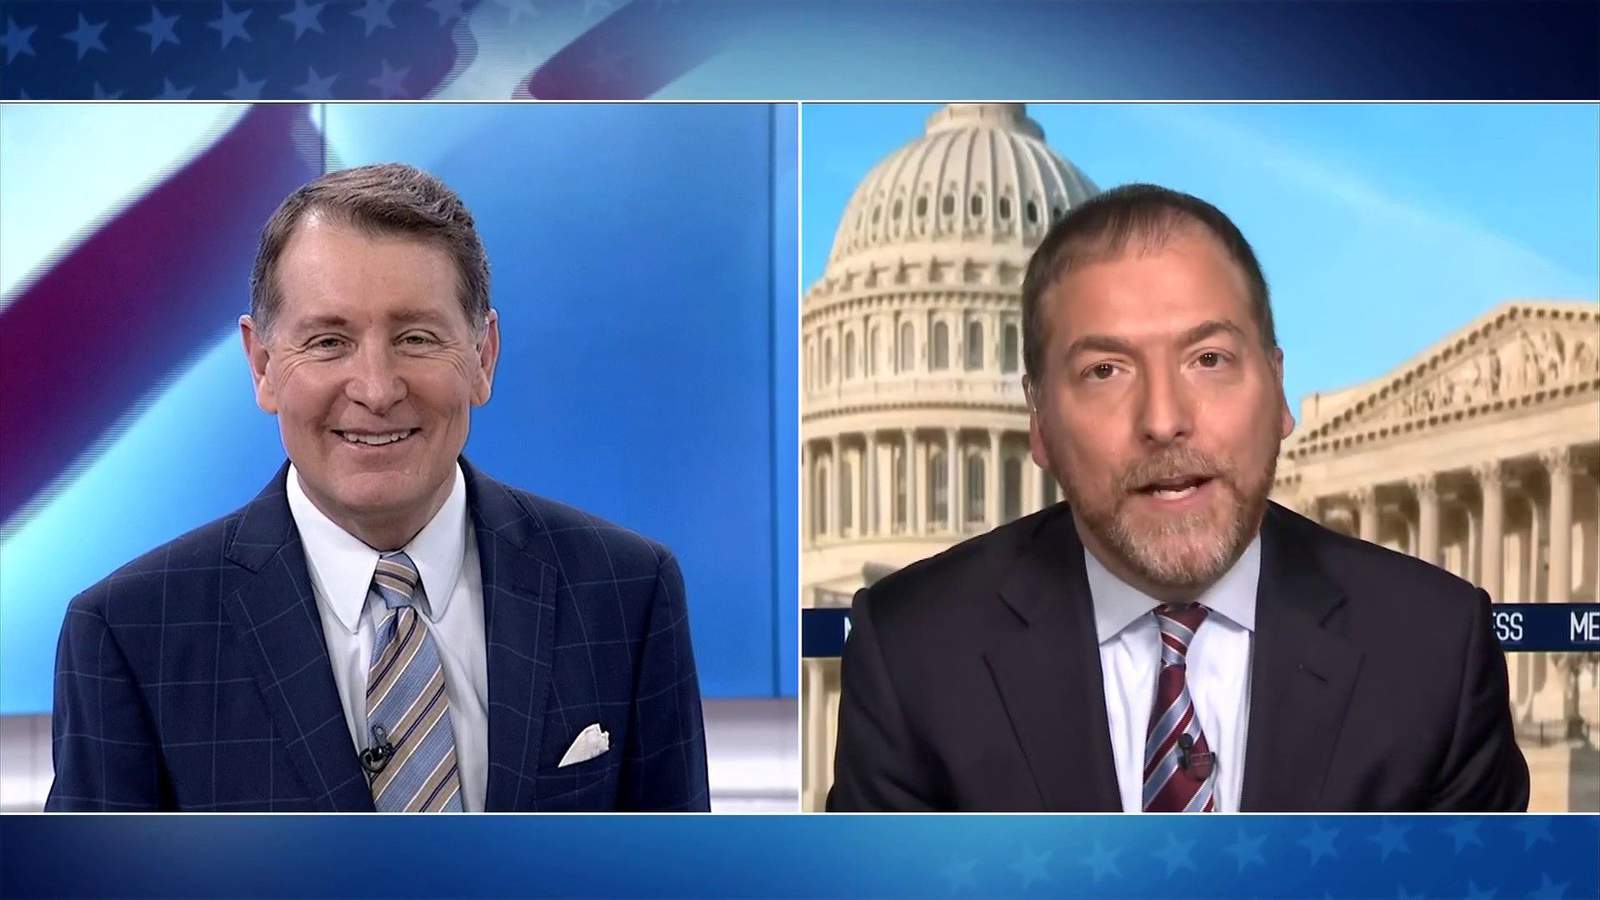 NBC News’ Chuck Todd weighs in on Virginia’s 2021 gubernatorial candidates